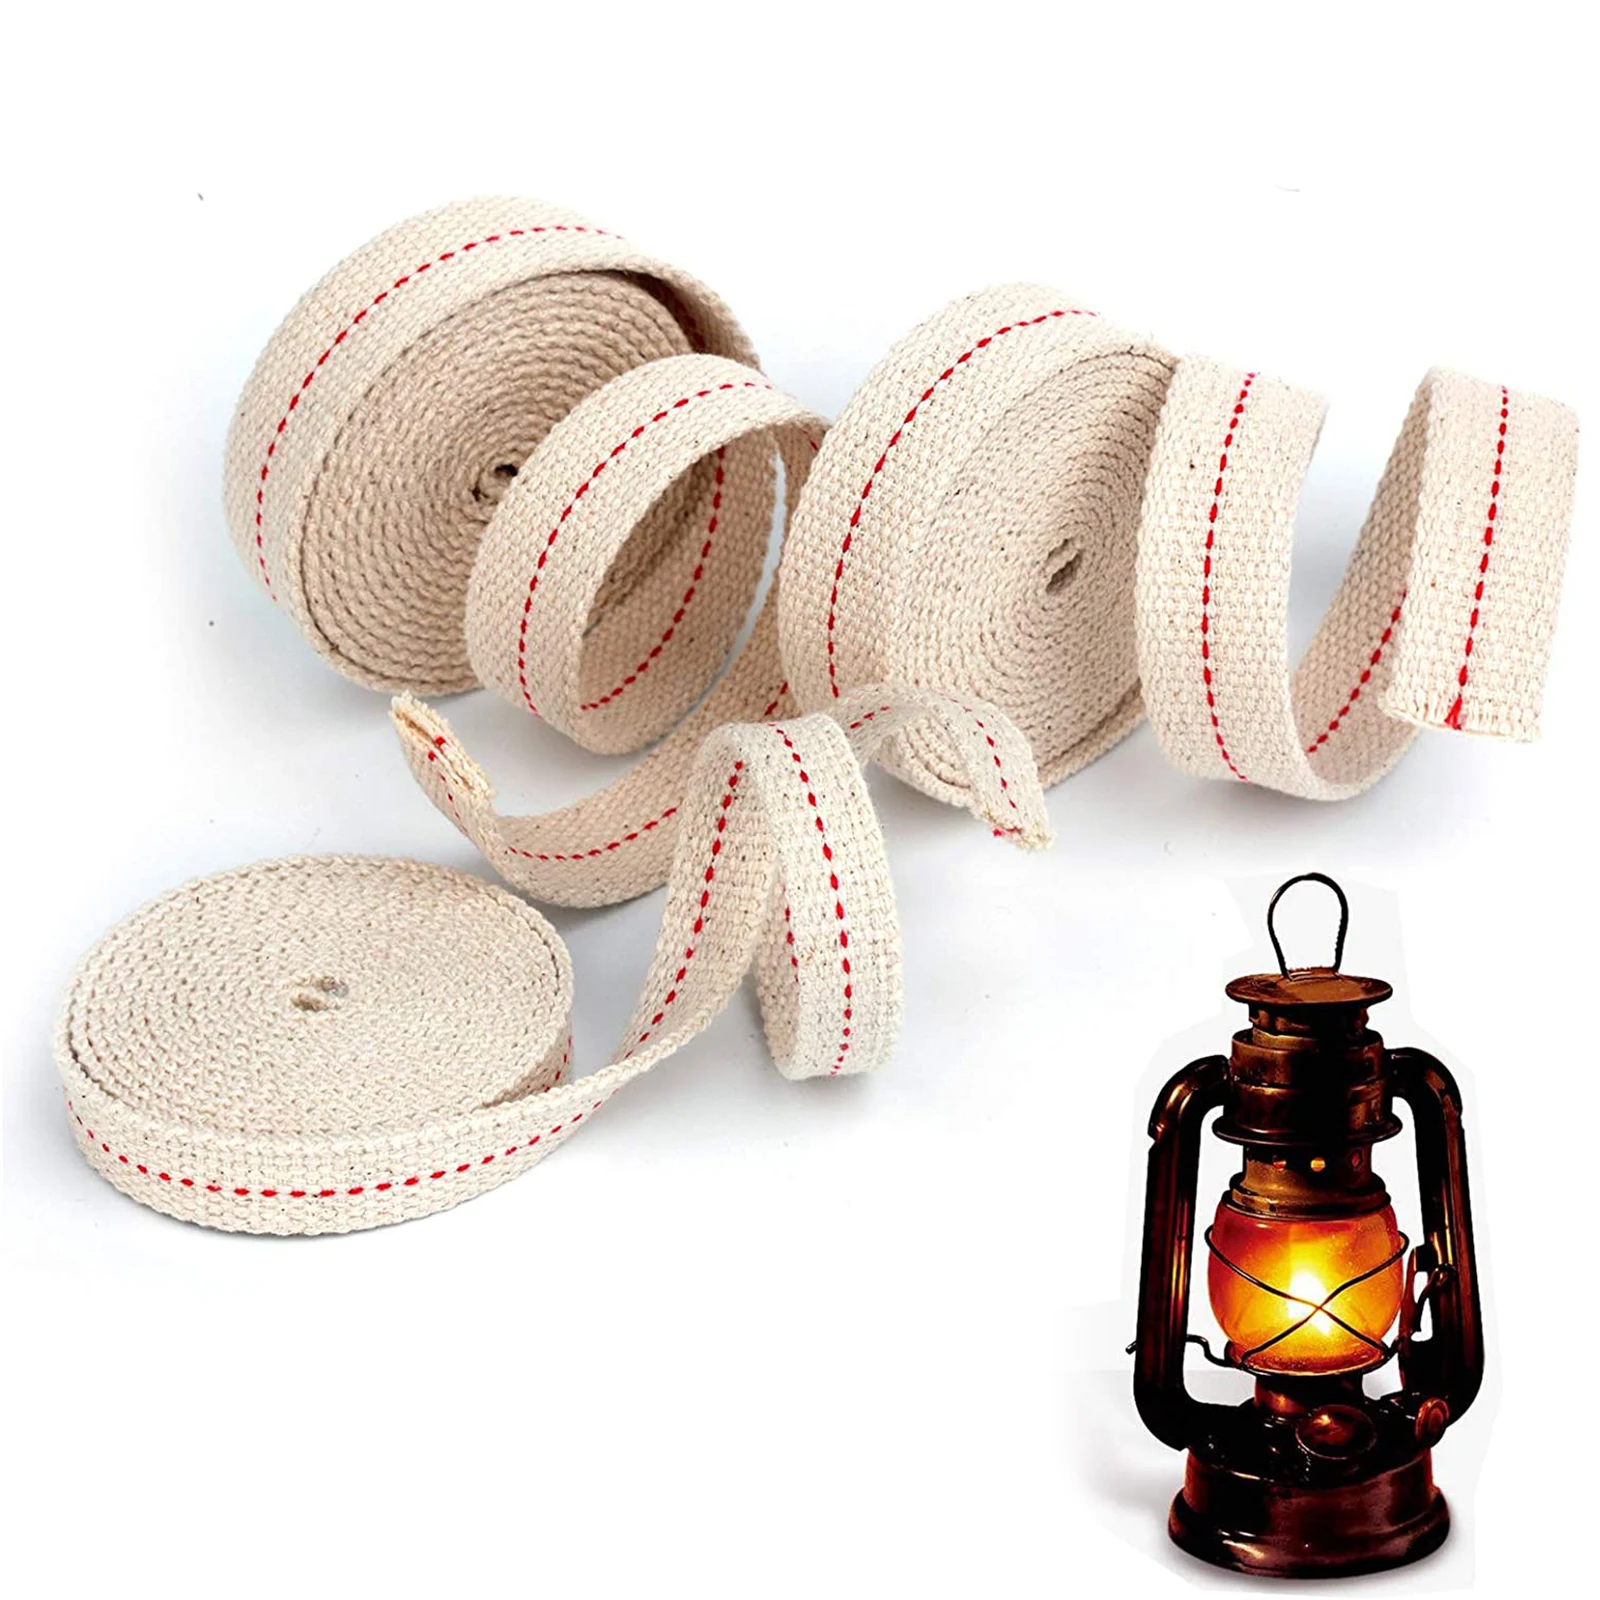 3 Rolls Cotton Oil Lamp Wick Flat Oil Lantern Wick for Oil Lamps and Oil Burners, 6.5Feet (Red)